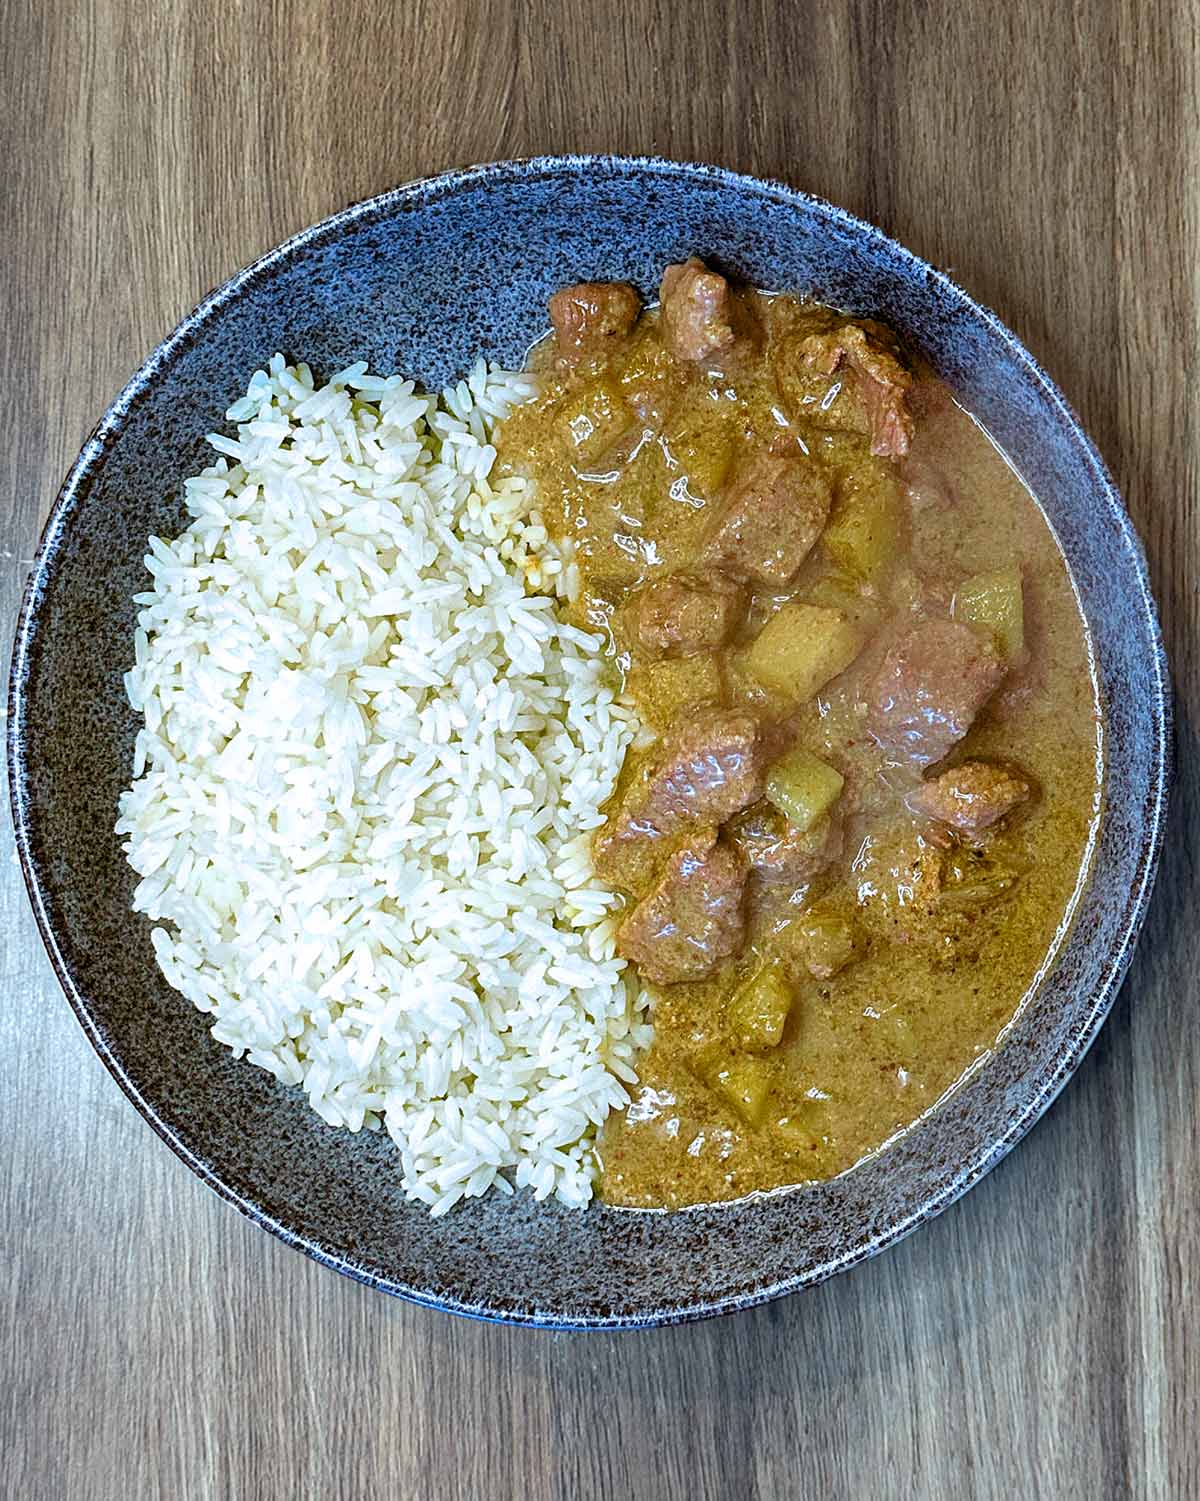 The curry in a bowl with rice.